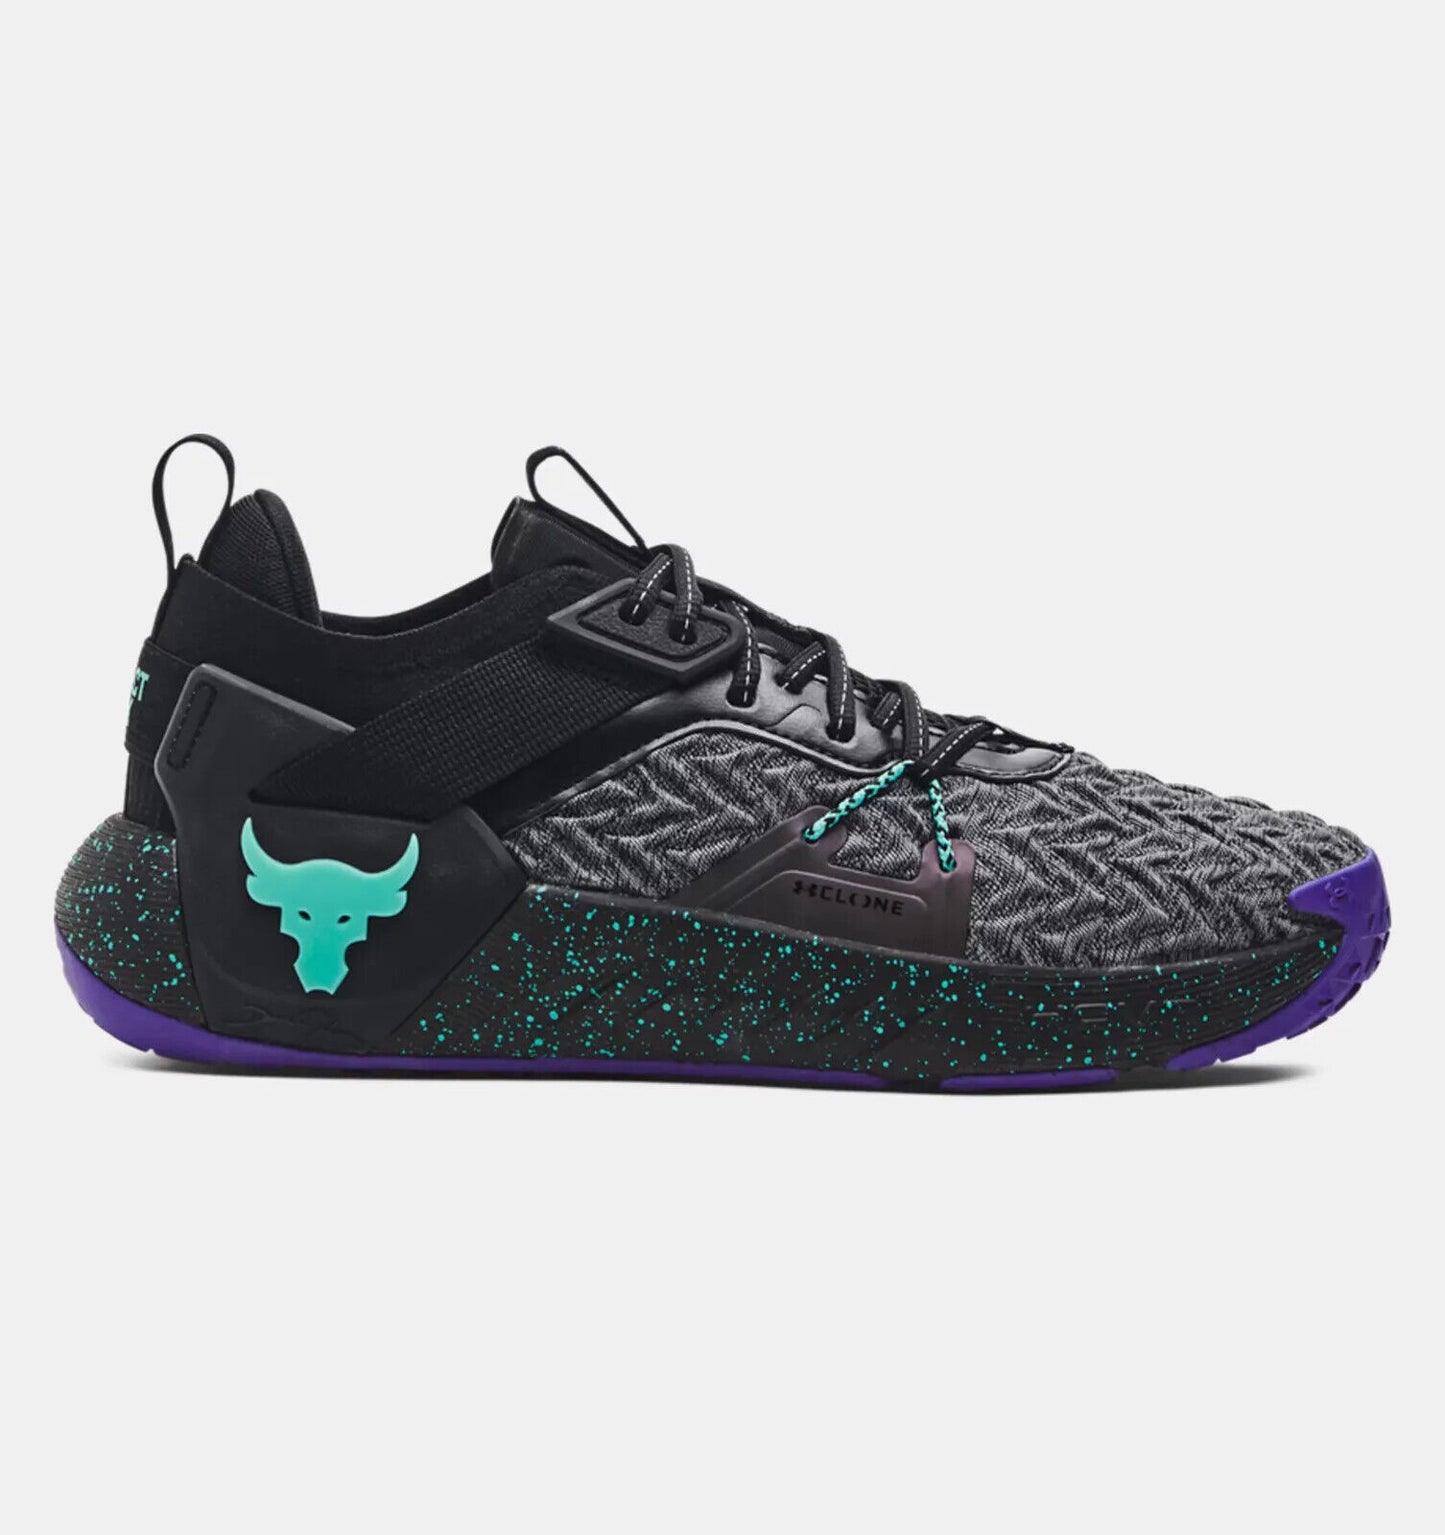 Under Armour Men's Project Rock 6 Trainers Black/Invisible